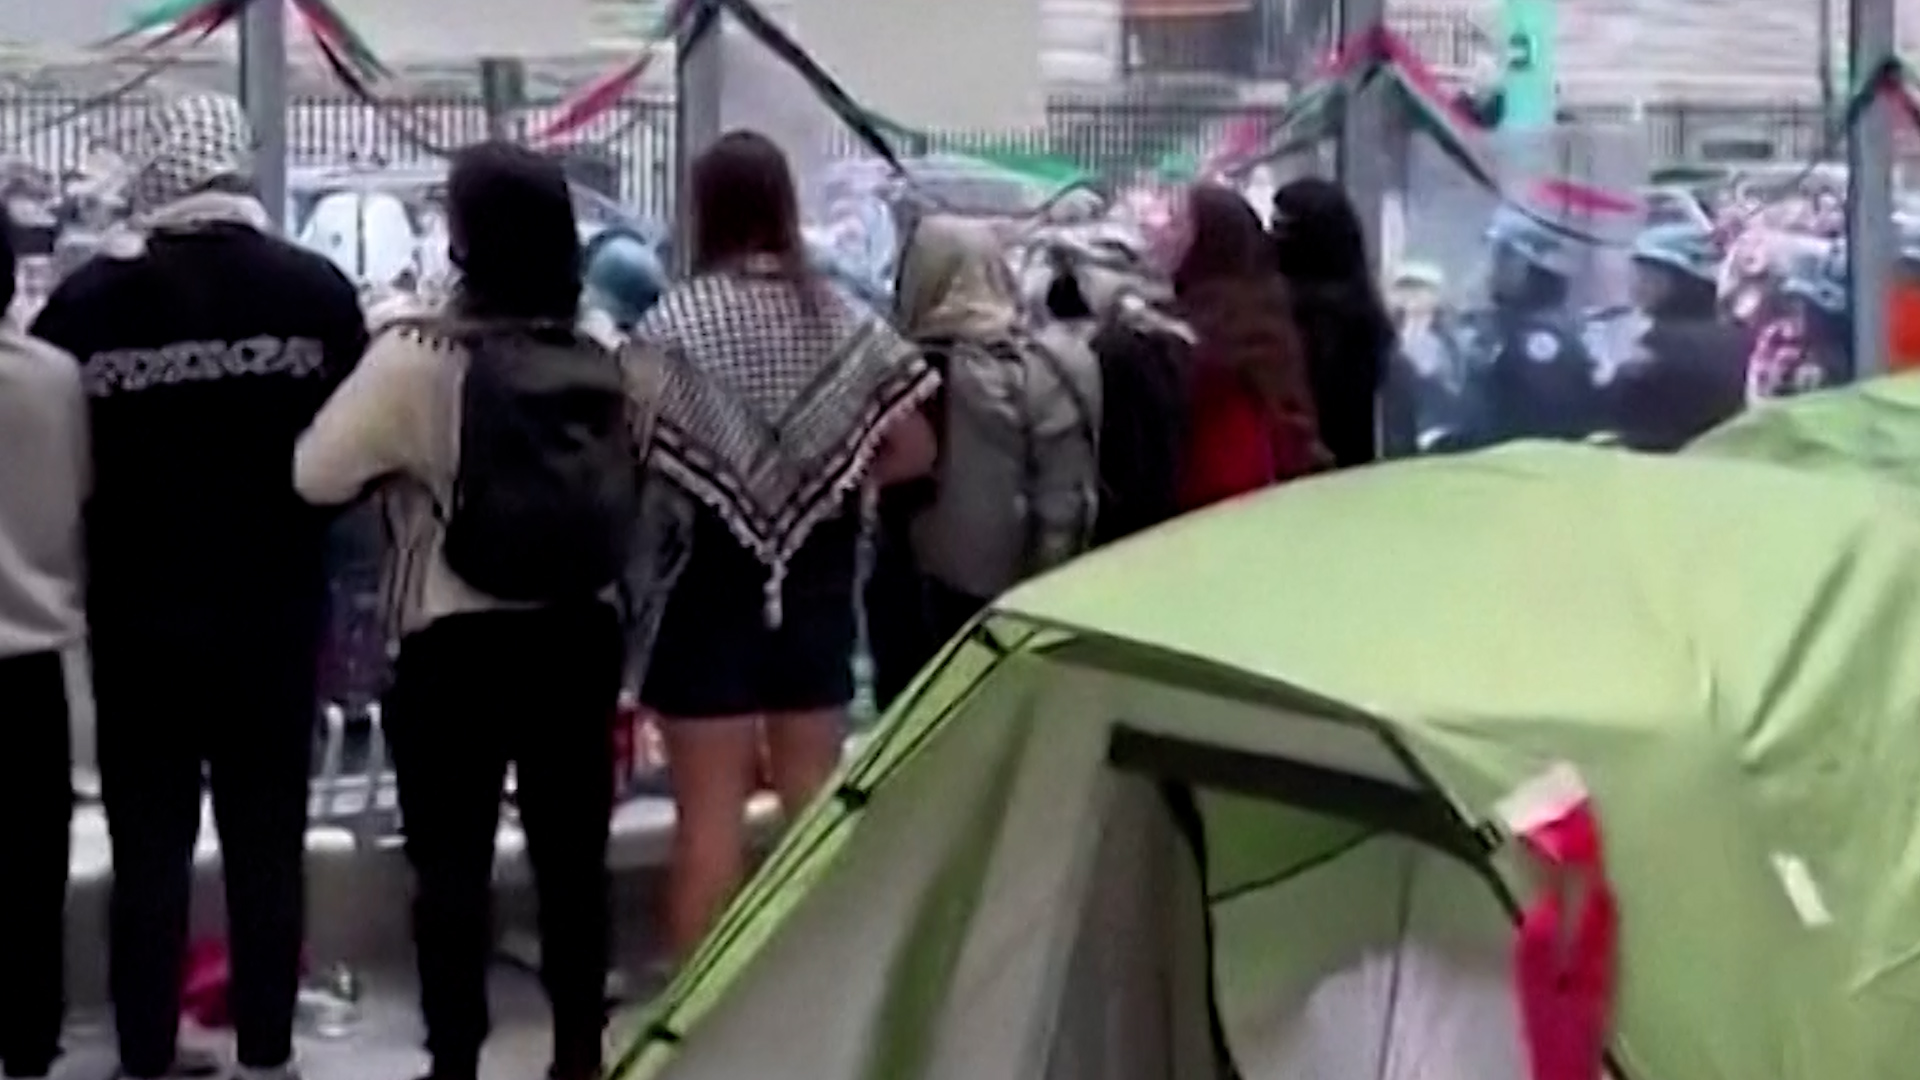 New York police remove protesters camped inside Fordham University building | Israel War on Gaza [Video]